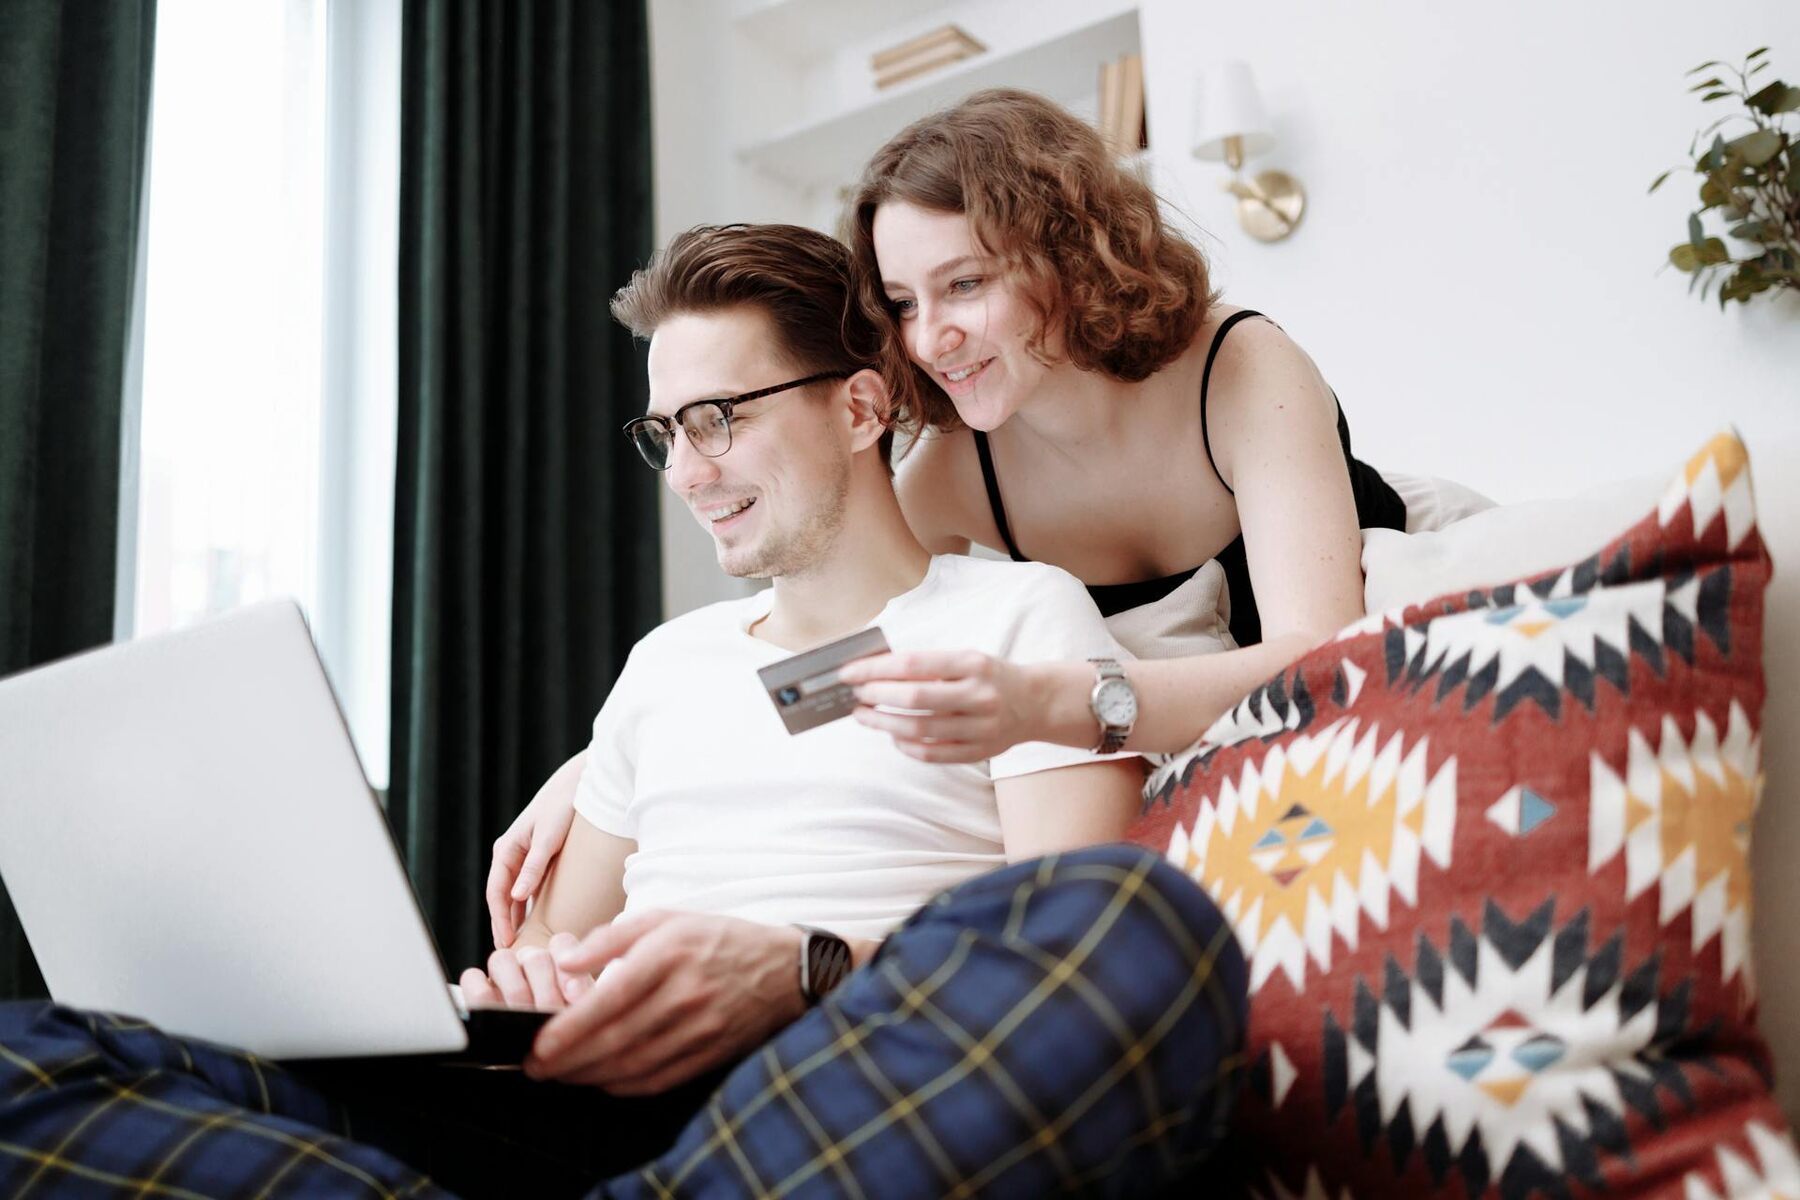 A couple sitting on a couch, using a laptop together